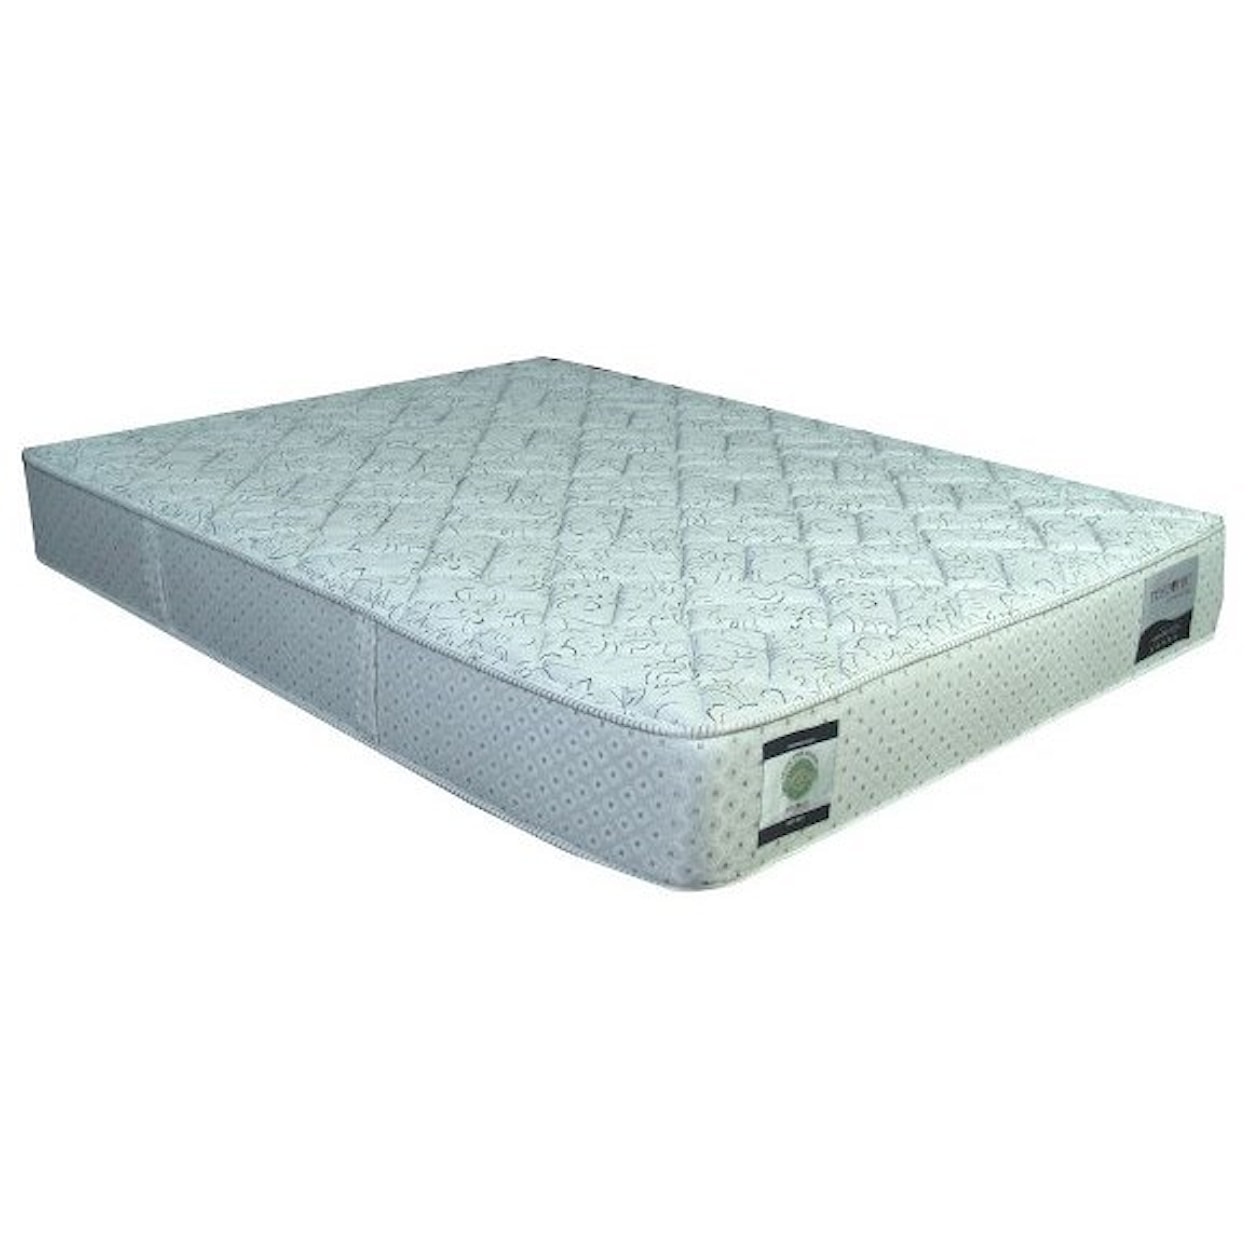 Restonic CC Linwood Firm Queen 12" Firm Two Sided Mattress